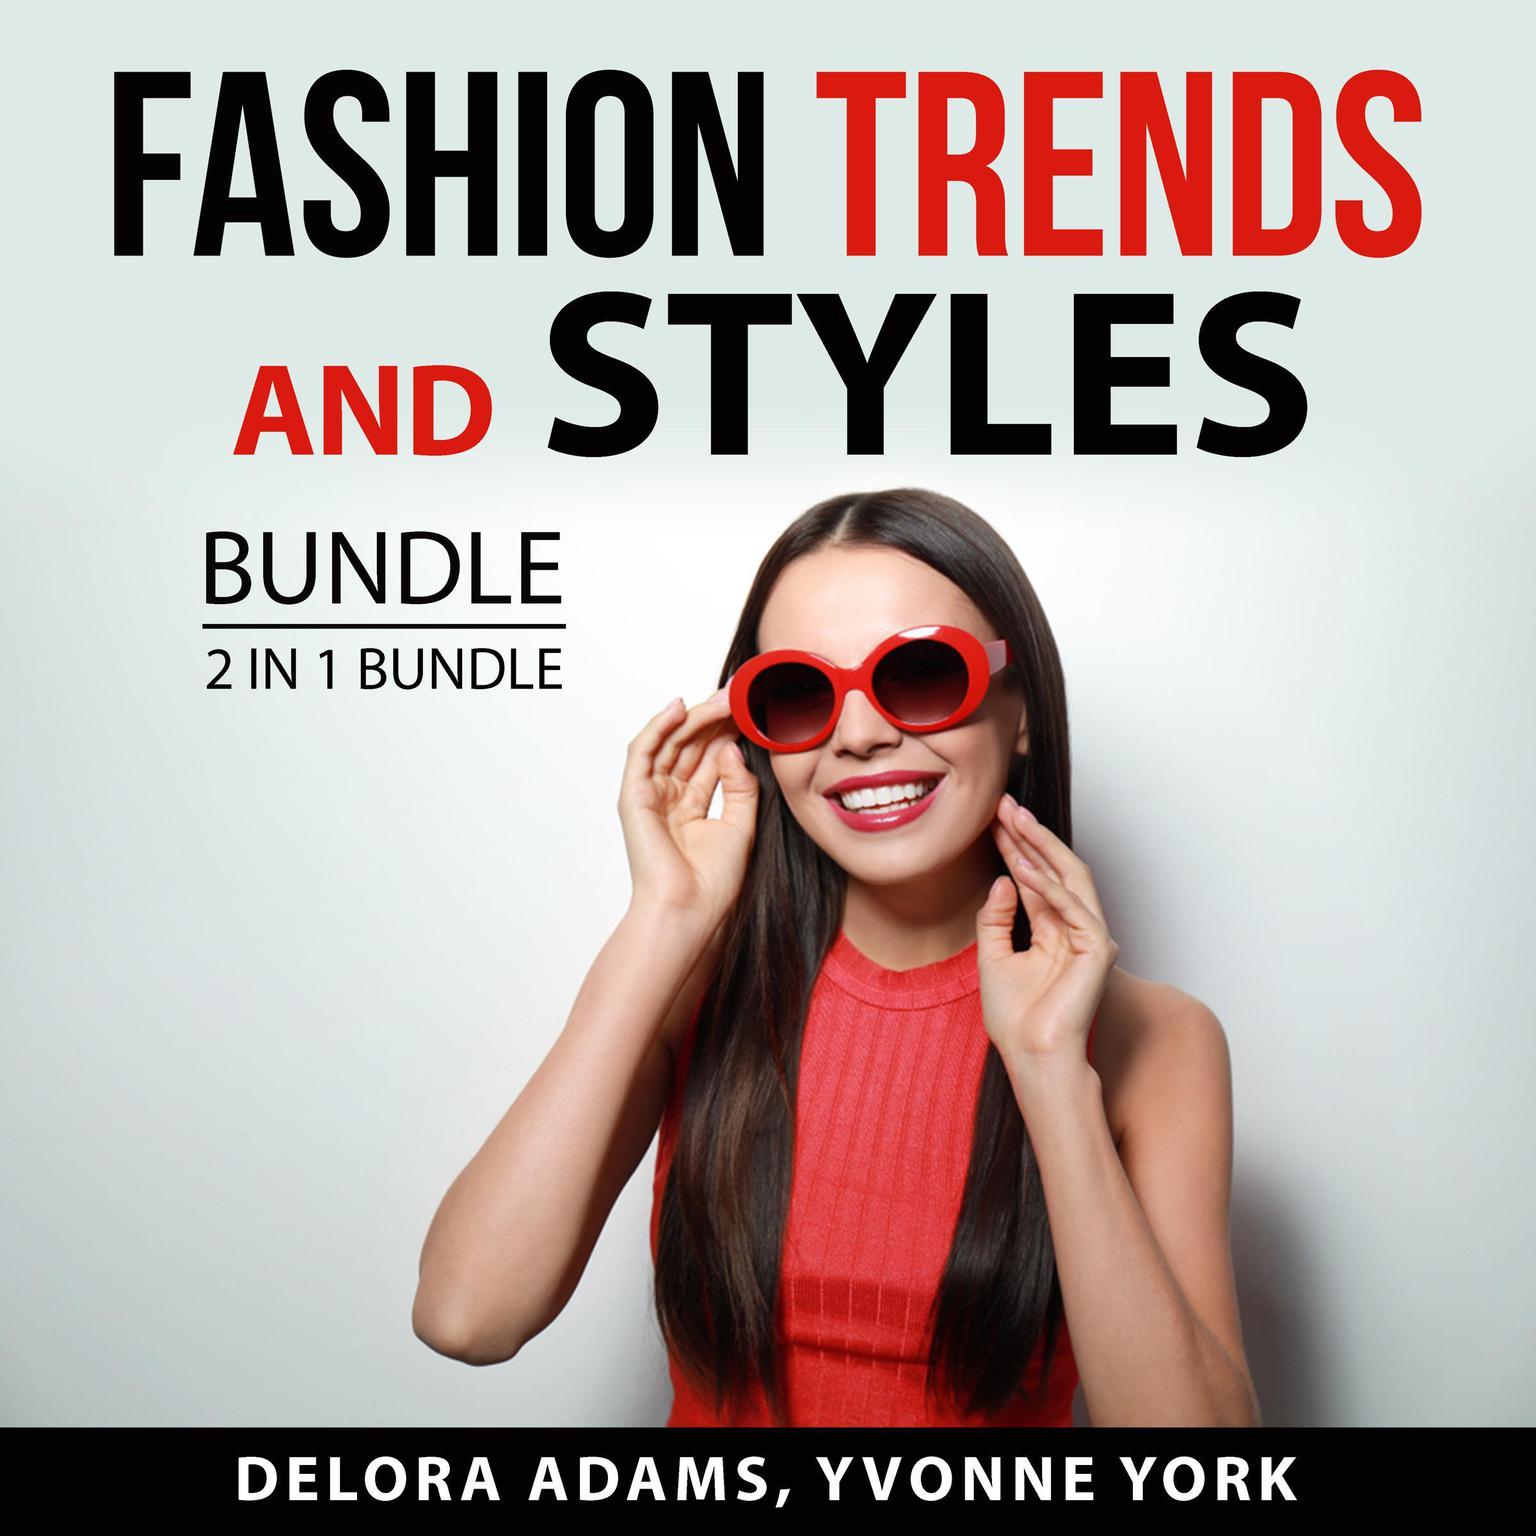 Fashion Trends and Styles Bundle, 2 in 1 Bundle: Following the Trend and Style Audiobook, by Delora Adams